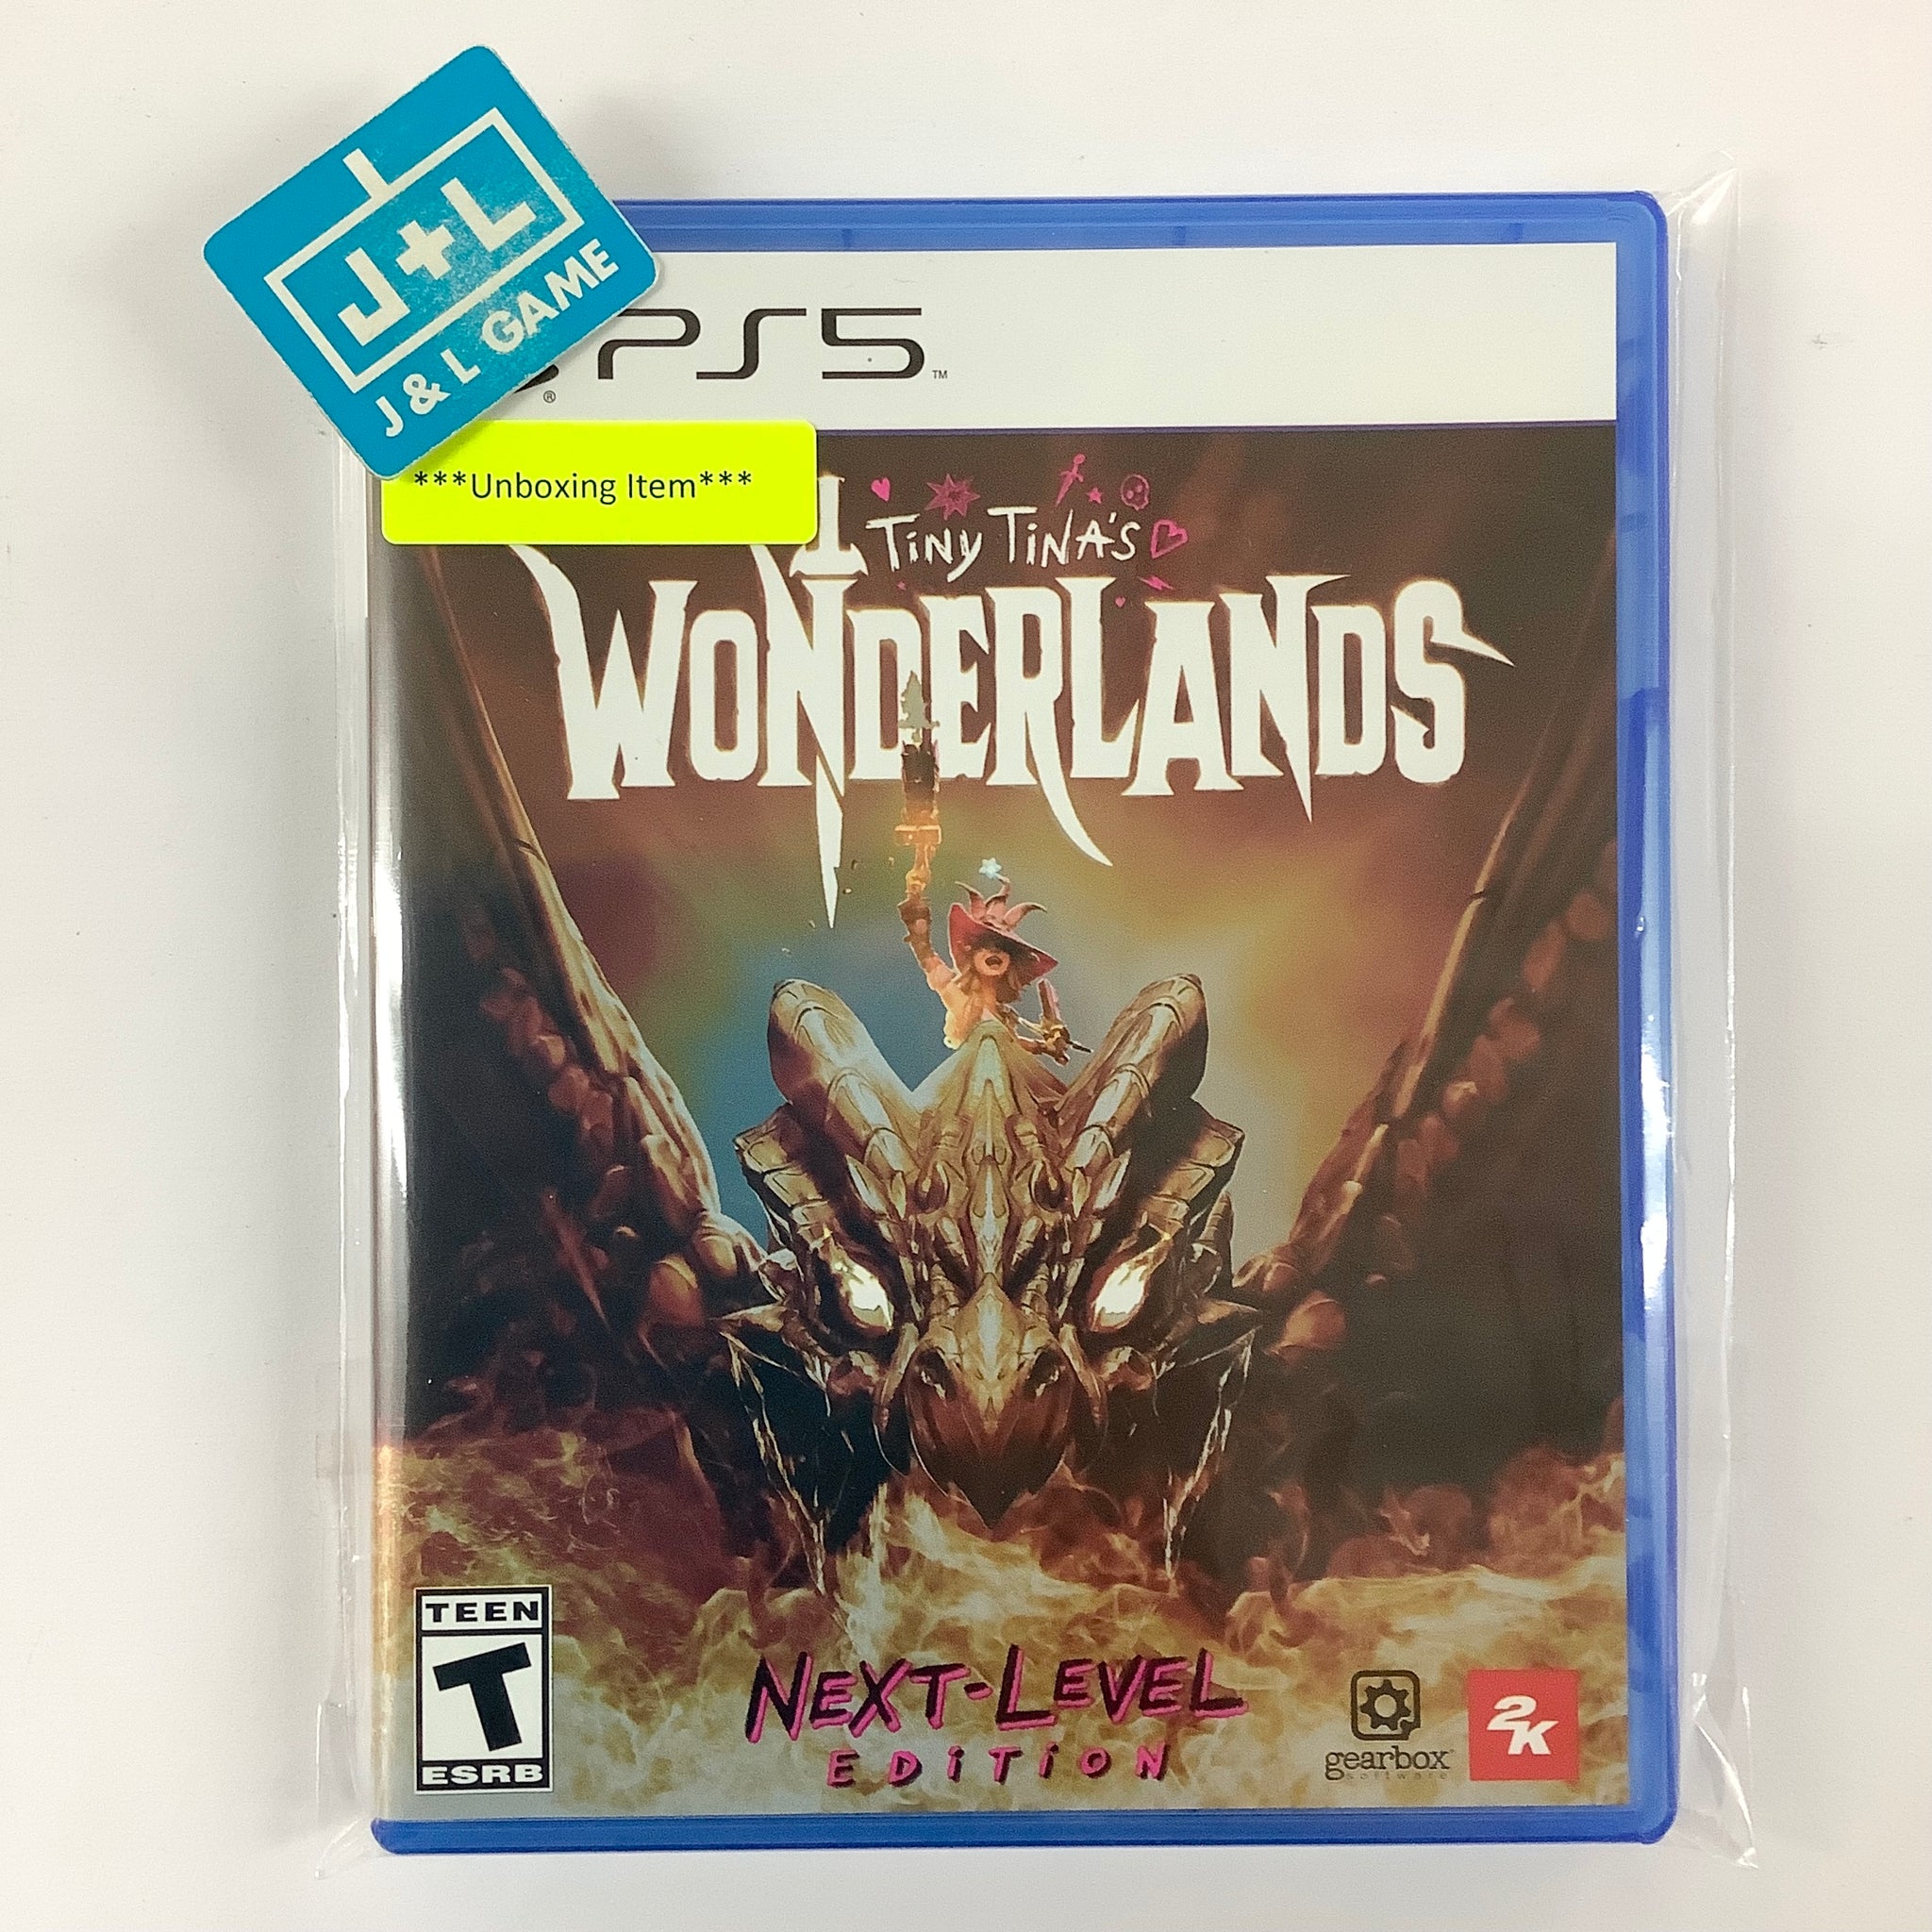 Tiny Tina's Wonderlands (Next Level Edition) - (PS5) PlayStation 5 [UNBOXING] Video Games 2K Games   